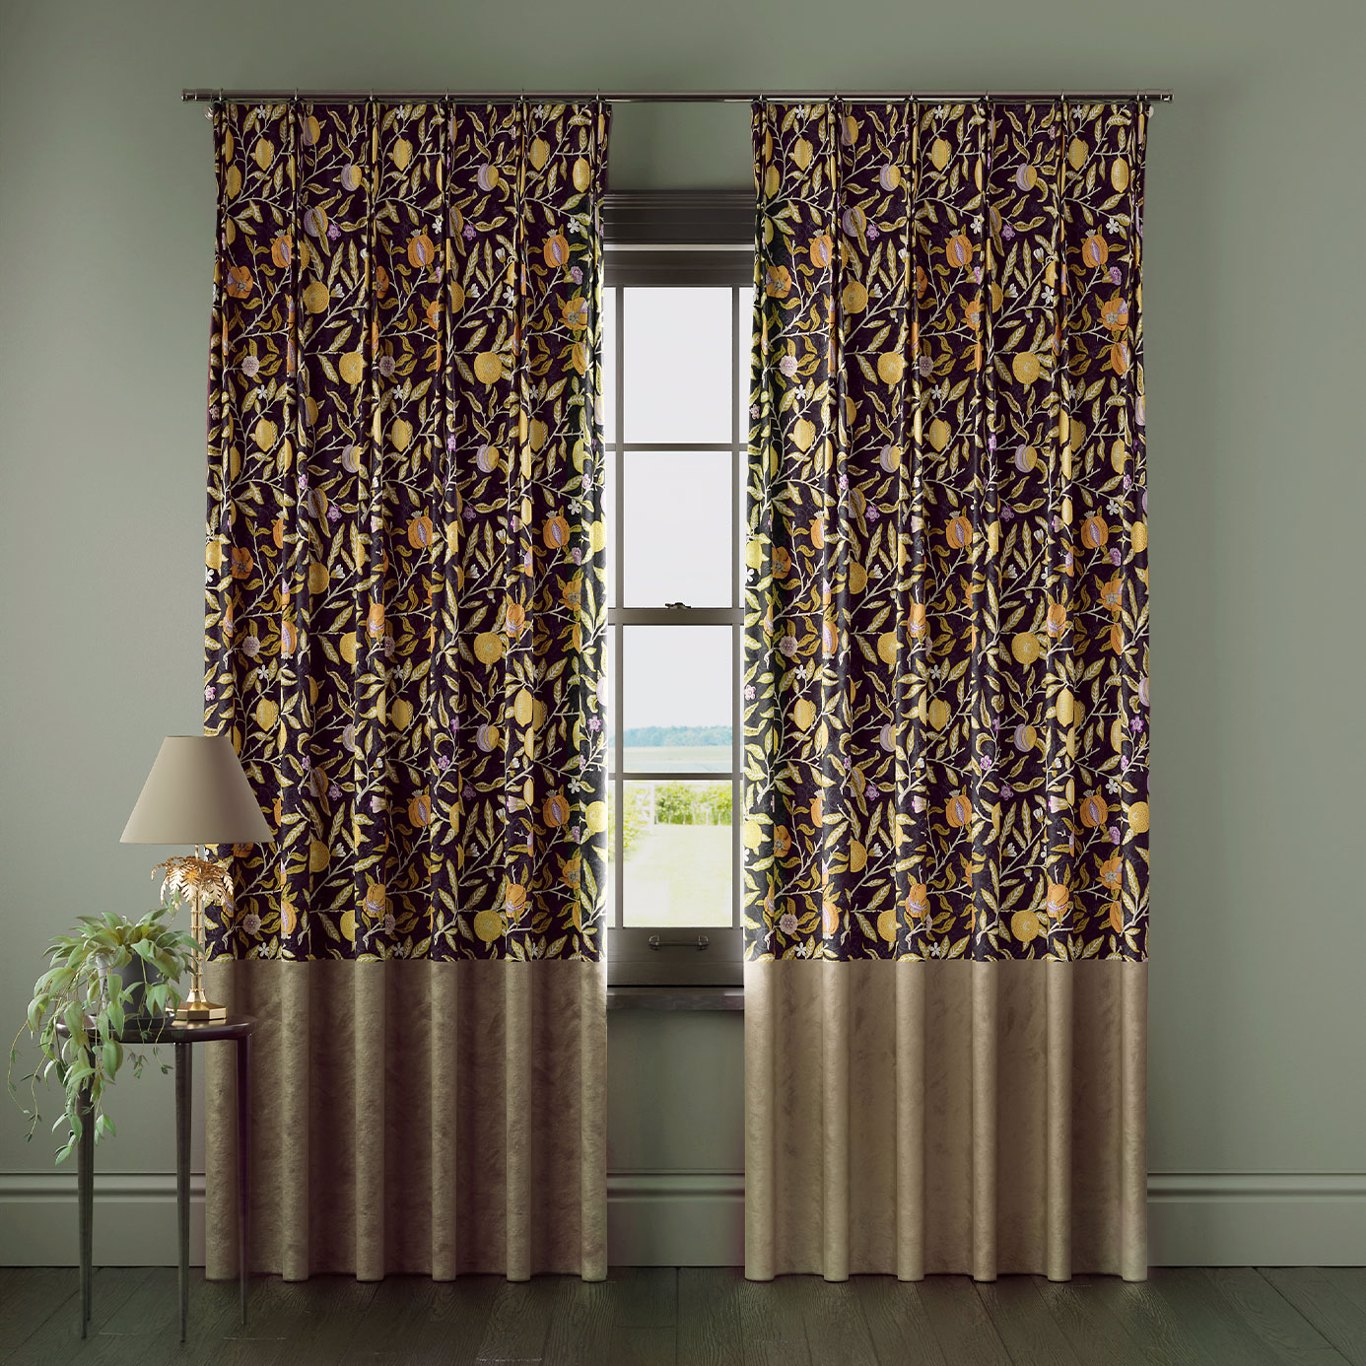 Fruit Curtains by ARC